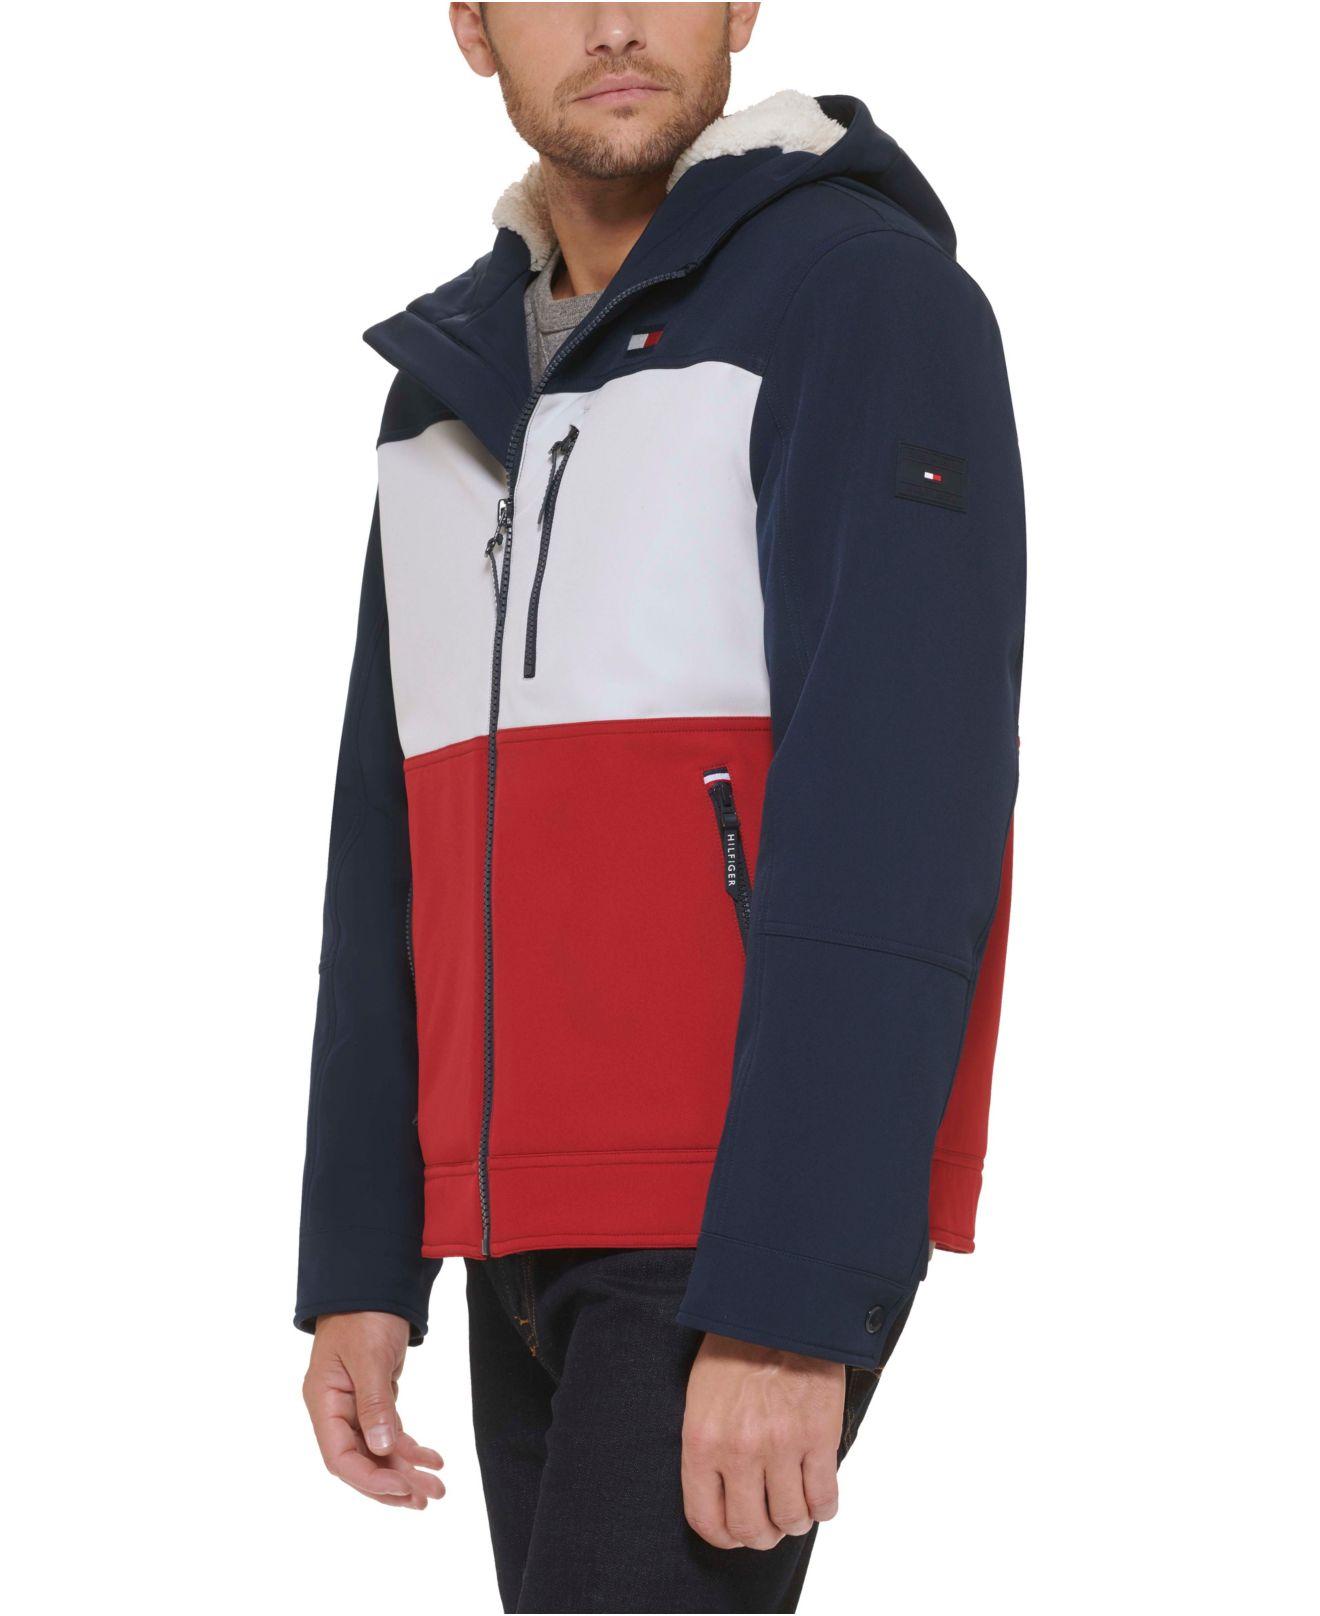 Tommy Hilfiger Men's Sherpa-Lined Softshell Hooded Jacket - Macy's